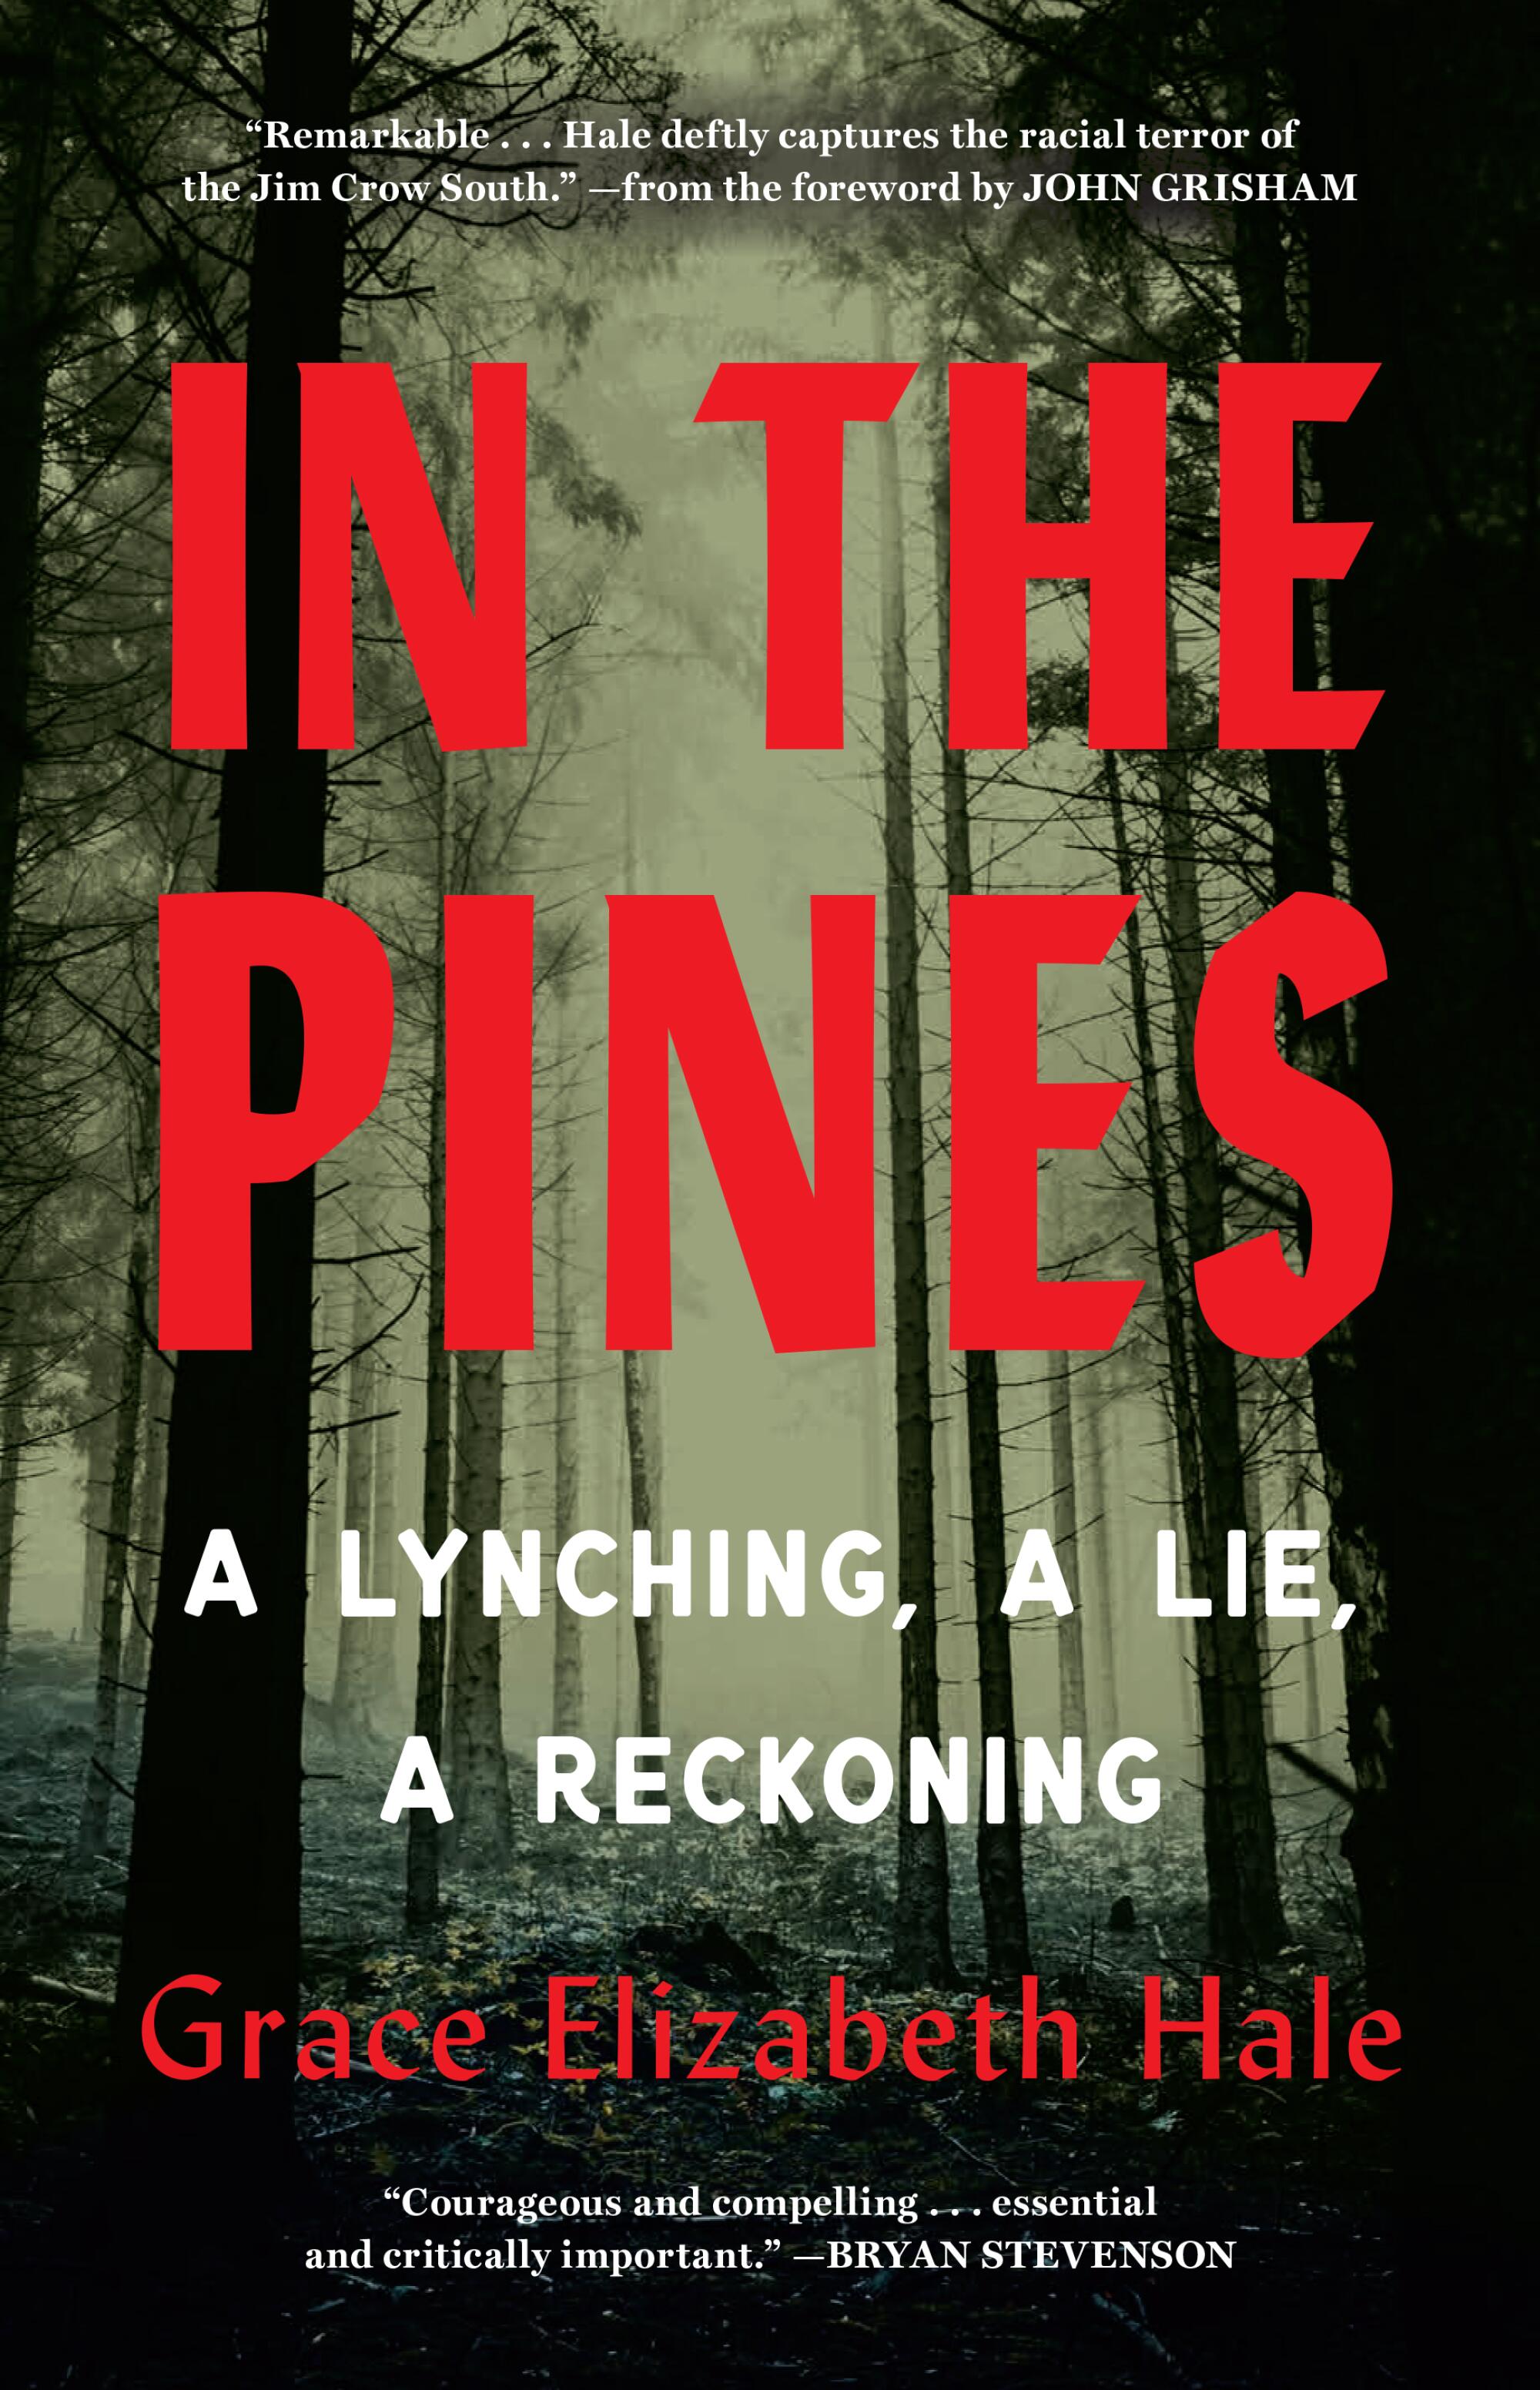 Book cover of "In the Pines" by Grace Elizabeth Hale